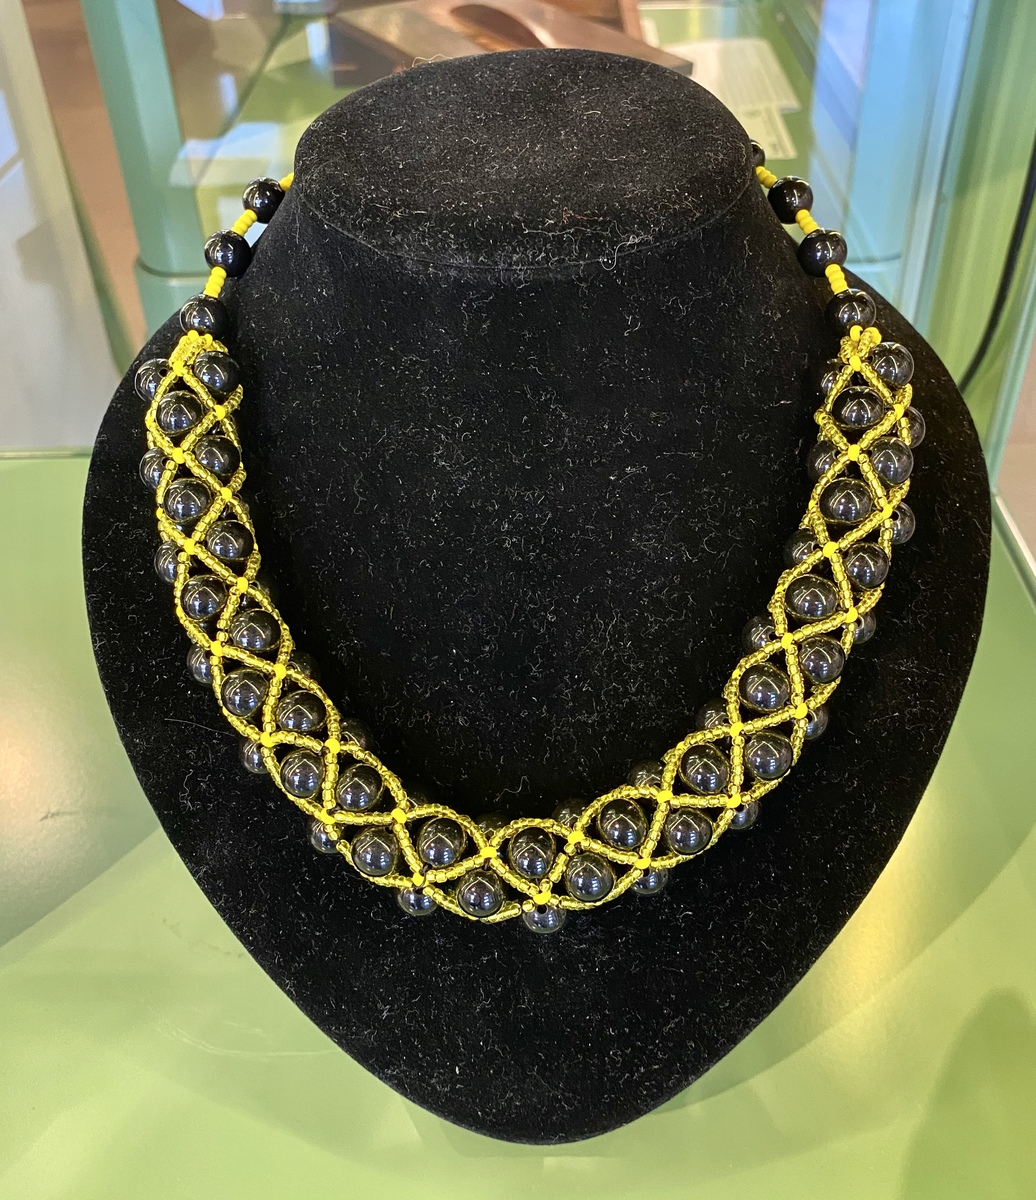 Netted necklace